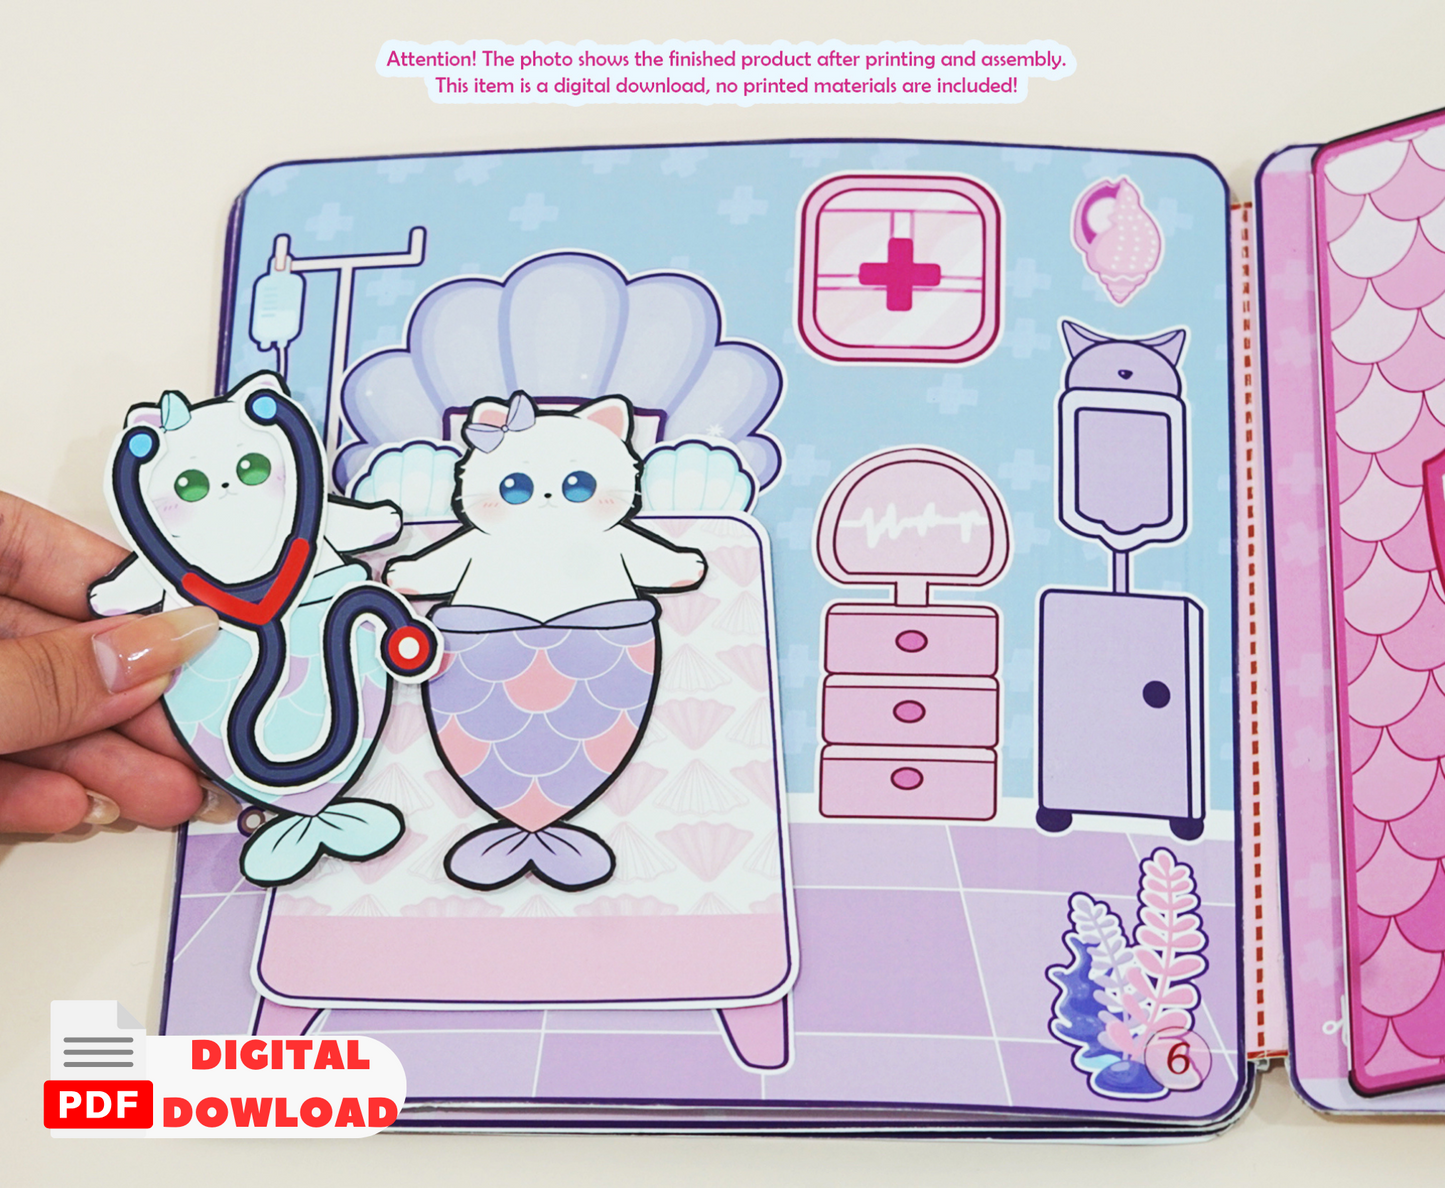 Yesa in mermaid hospital dollhouse printable 🌈 Yesa in sea world printable | Busy book for kids | PDF | Instant download | DIY kít for kids 🌈 Woa Doll Crafts